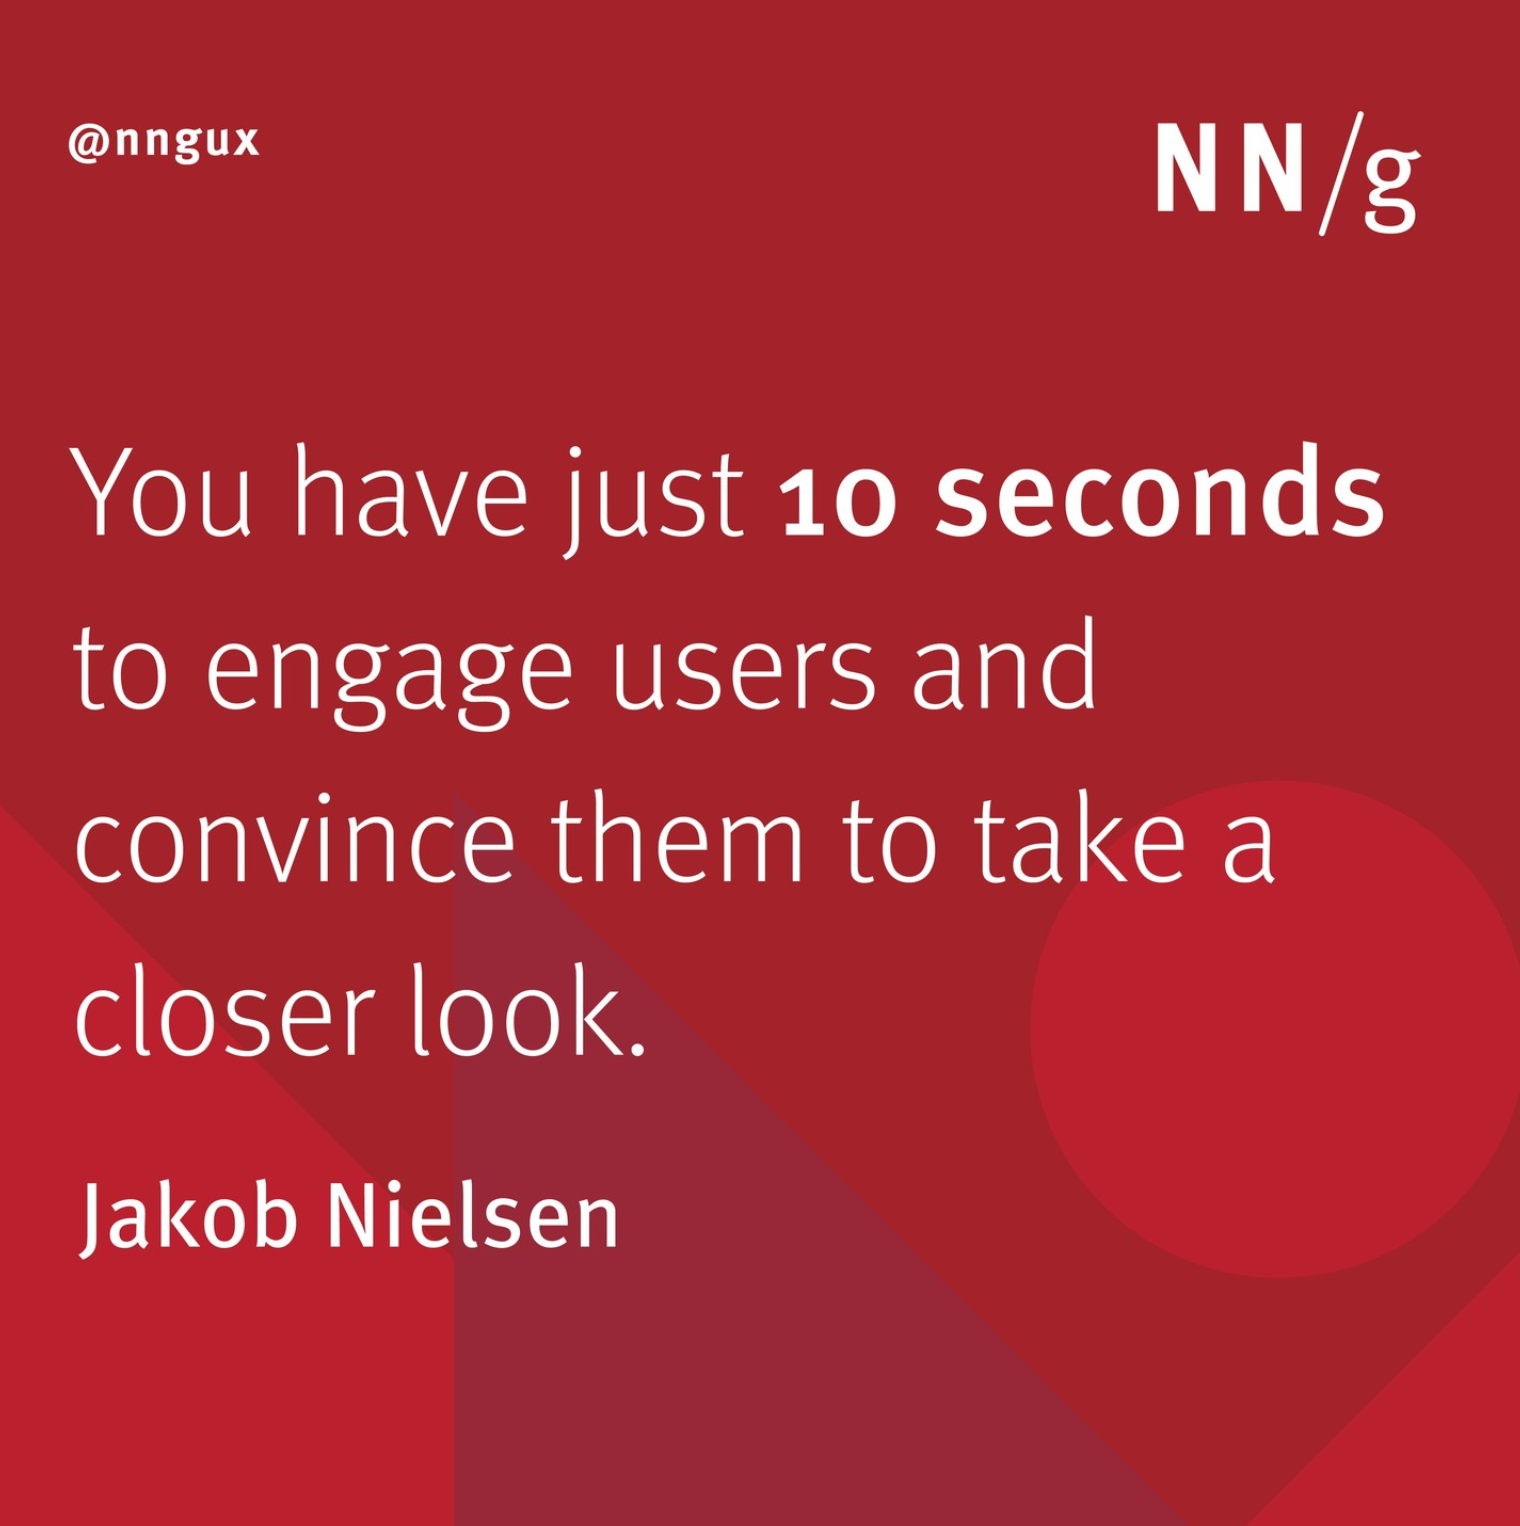 You have just 10 seconds to engage users and convince them to take closer look. Jakob Nielsen